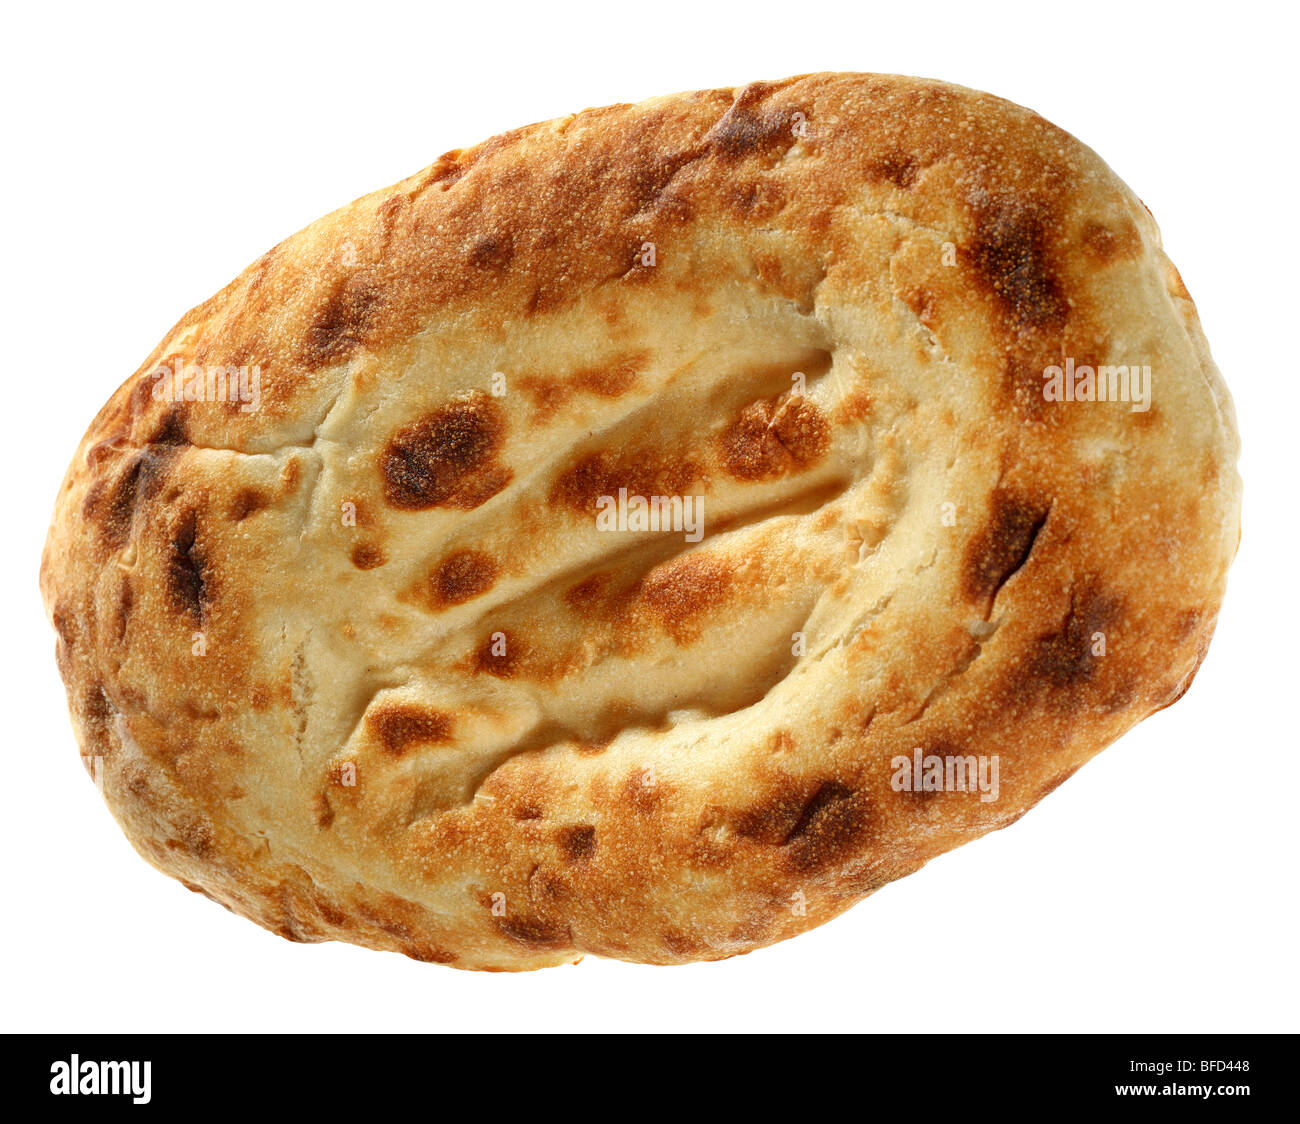 Bread east food detail on white background Stock Photo